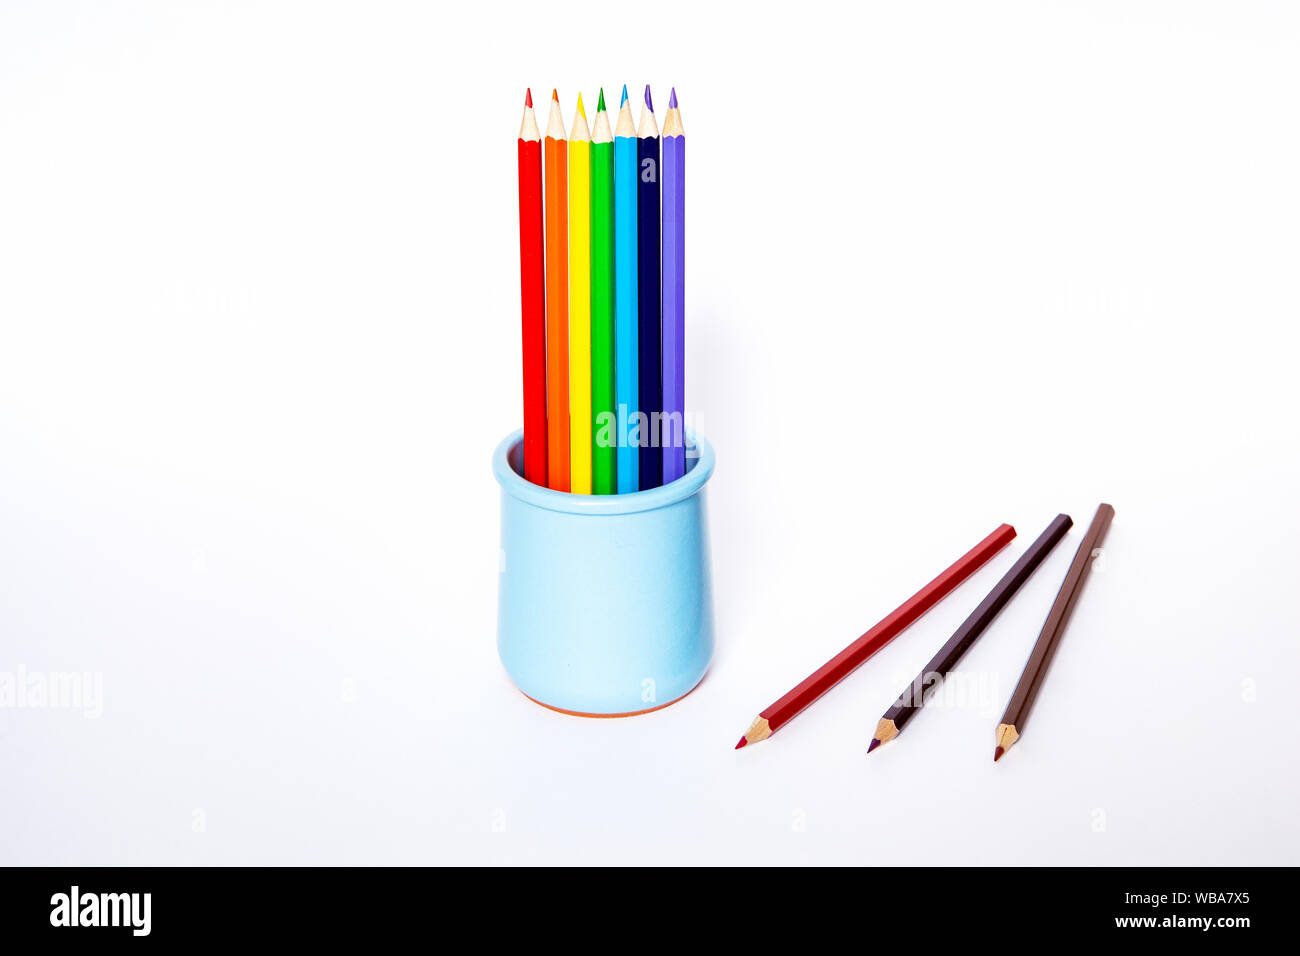 Image with blue vase with pencils on white background for web background design. School equipment set. Stock Photo